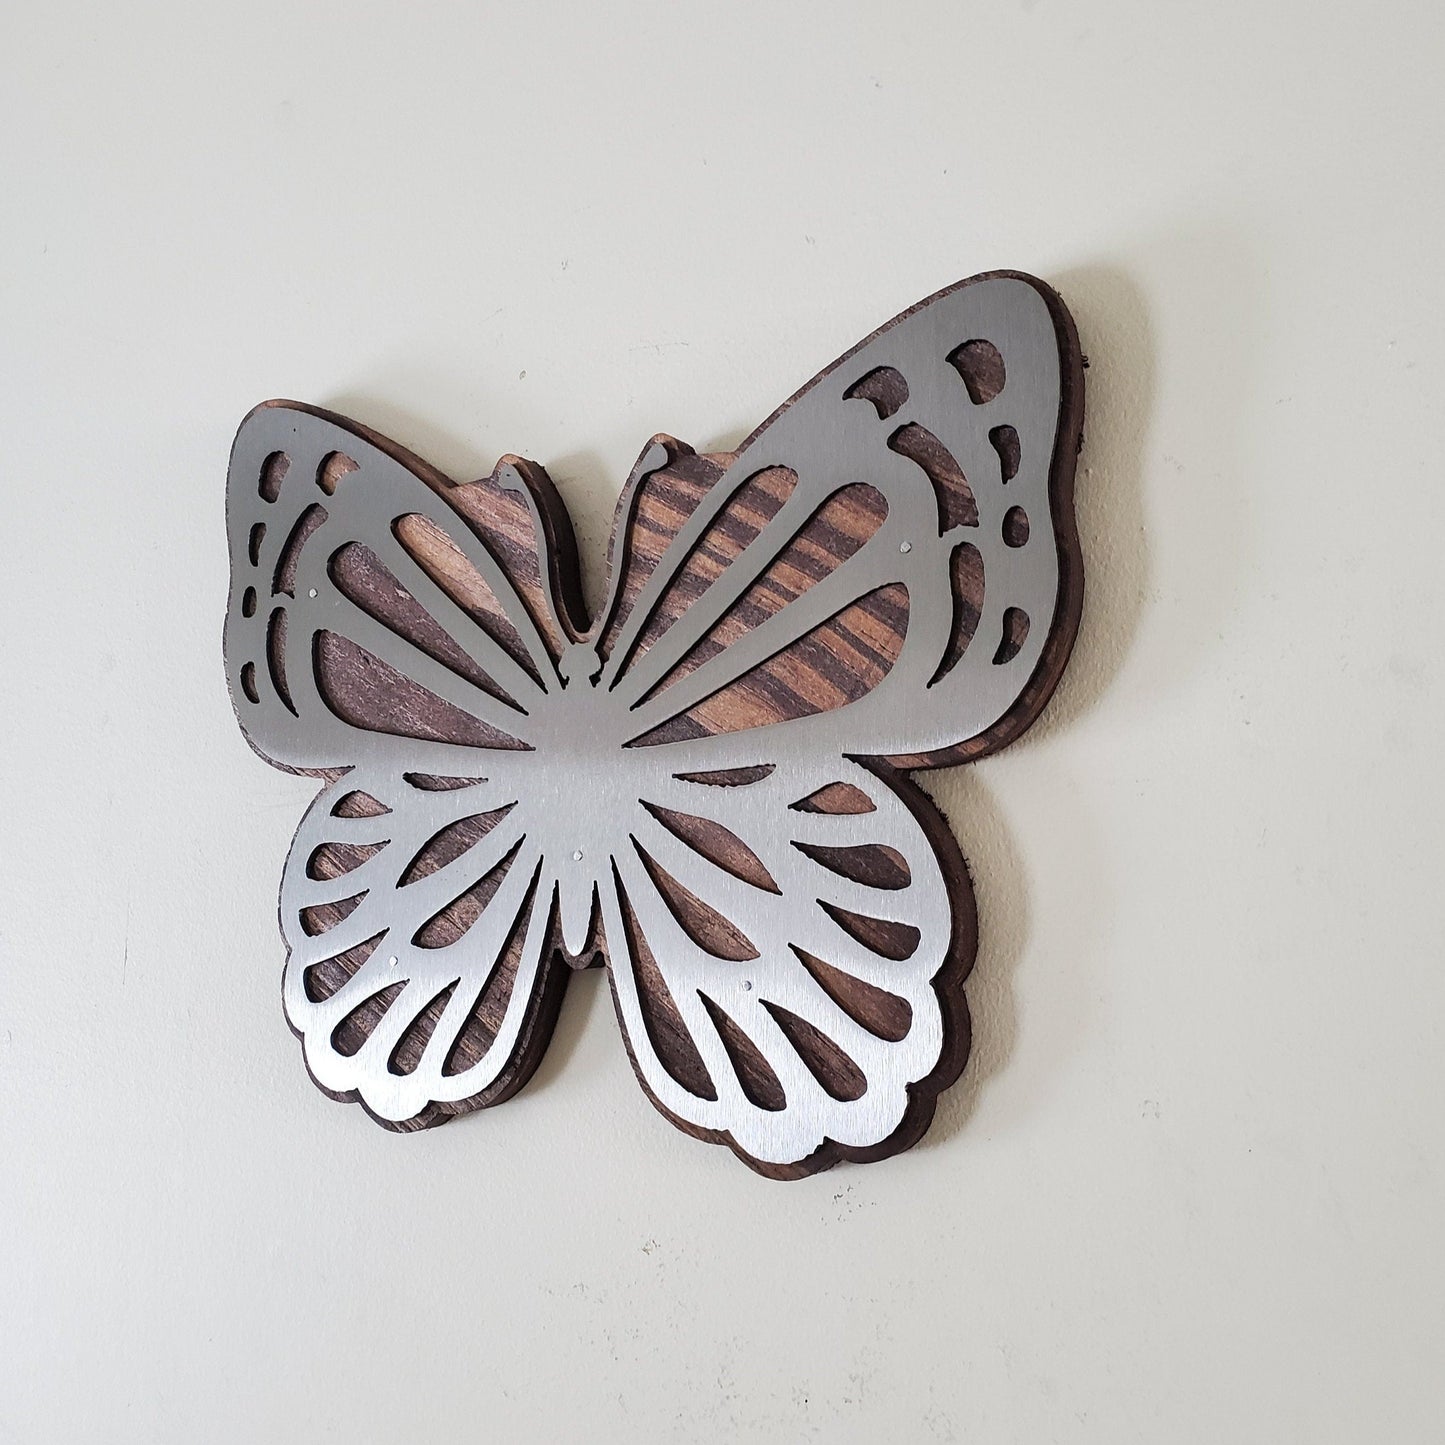 Metal Art wall decor Butterfly to highlight the beautiful wood grains through delicate steel cutout details which seem to frame the rustic wood beneath it. The metal reflects light, mimicking the sun’s rays